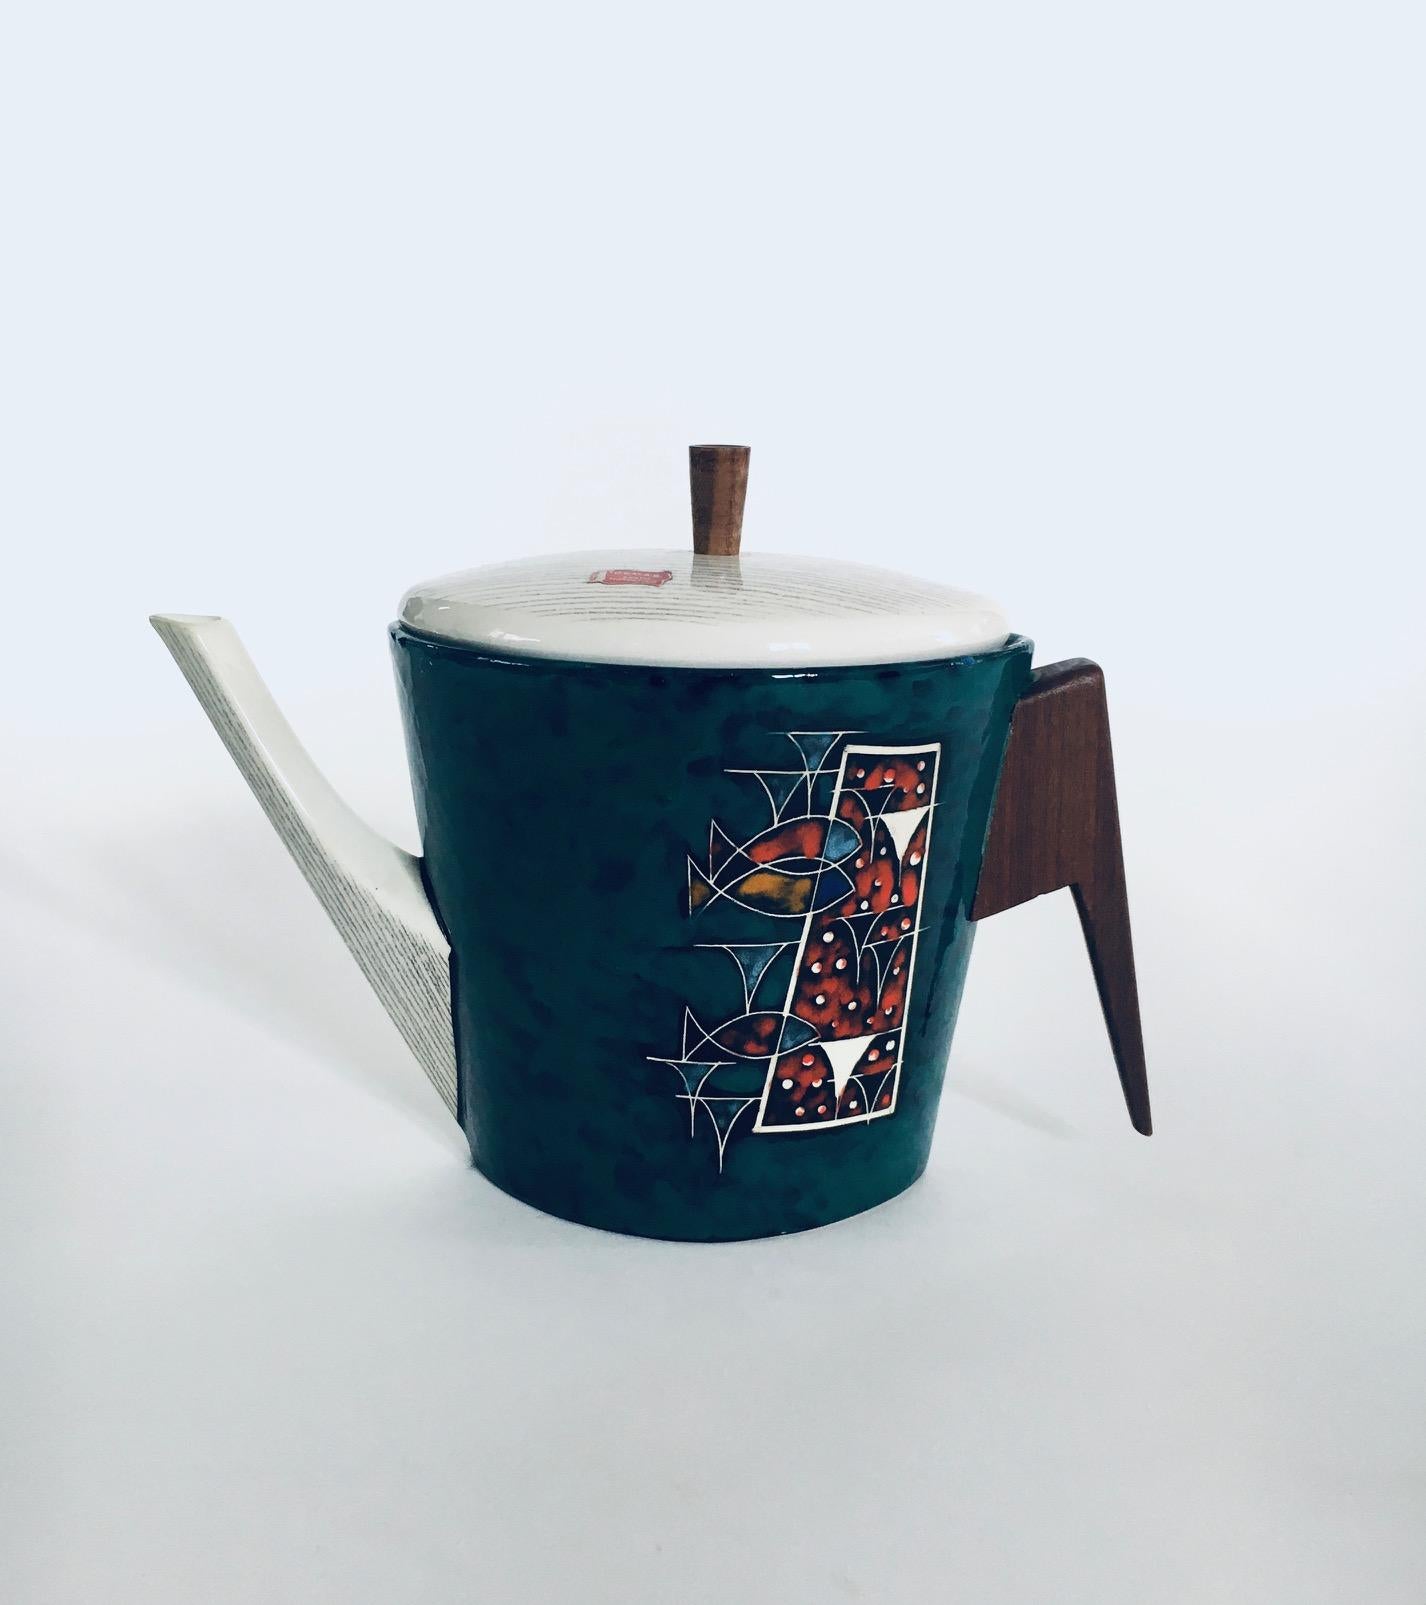 Midcentury Modern Art Ceramic Tea or Coffee Service Set by CEMAS, Italy 1950's In Good Condition For Sale In Oud-Turnhout, VAN